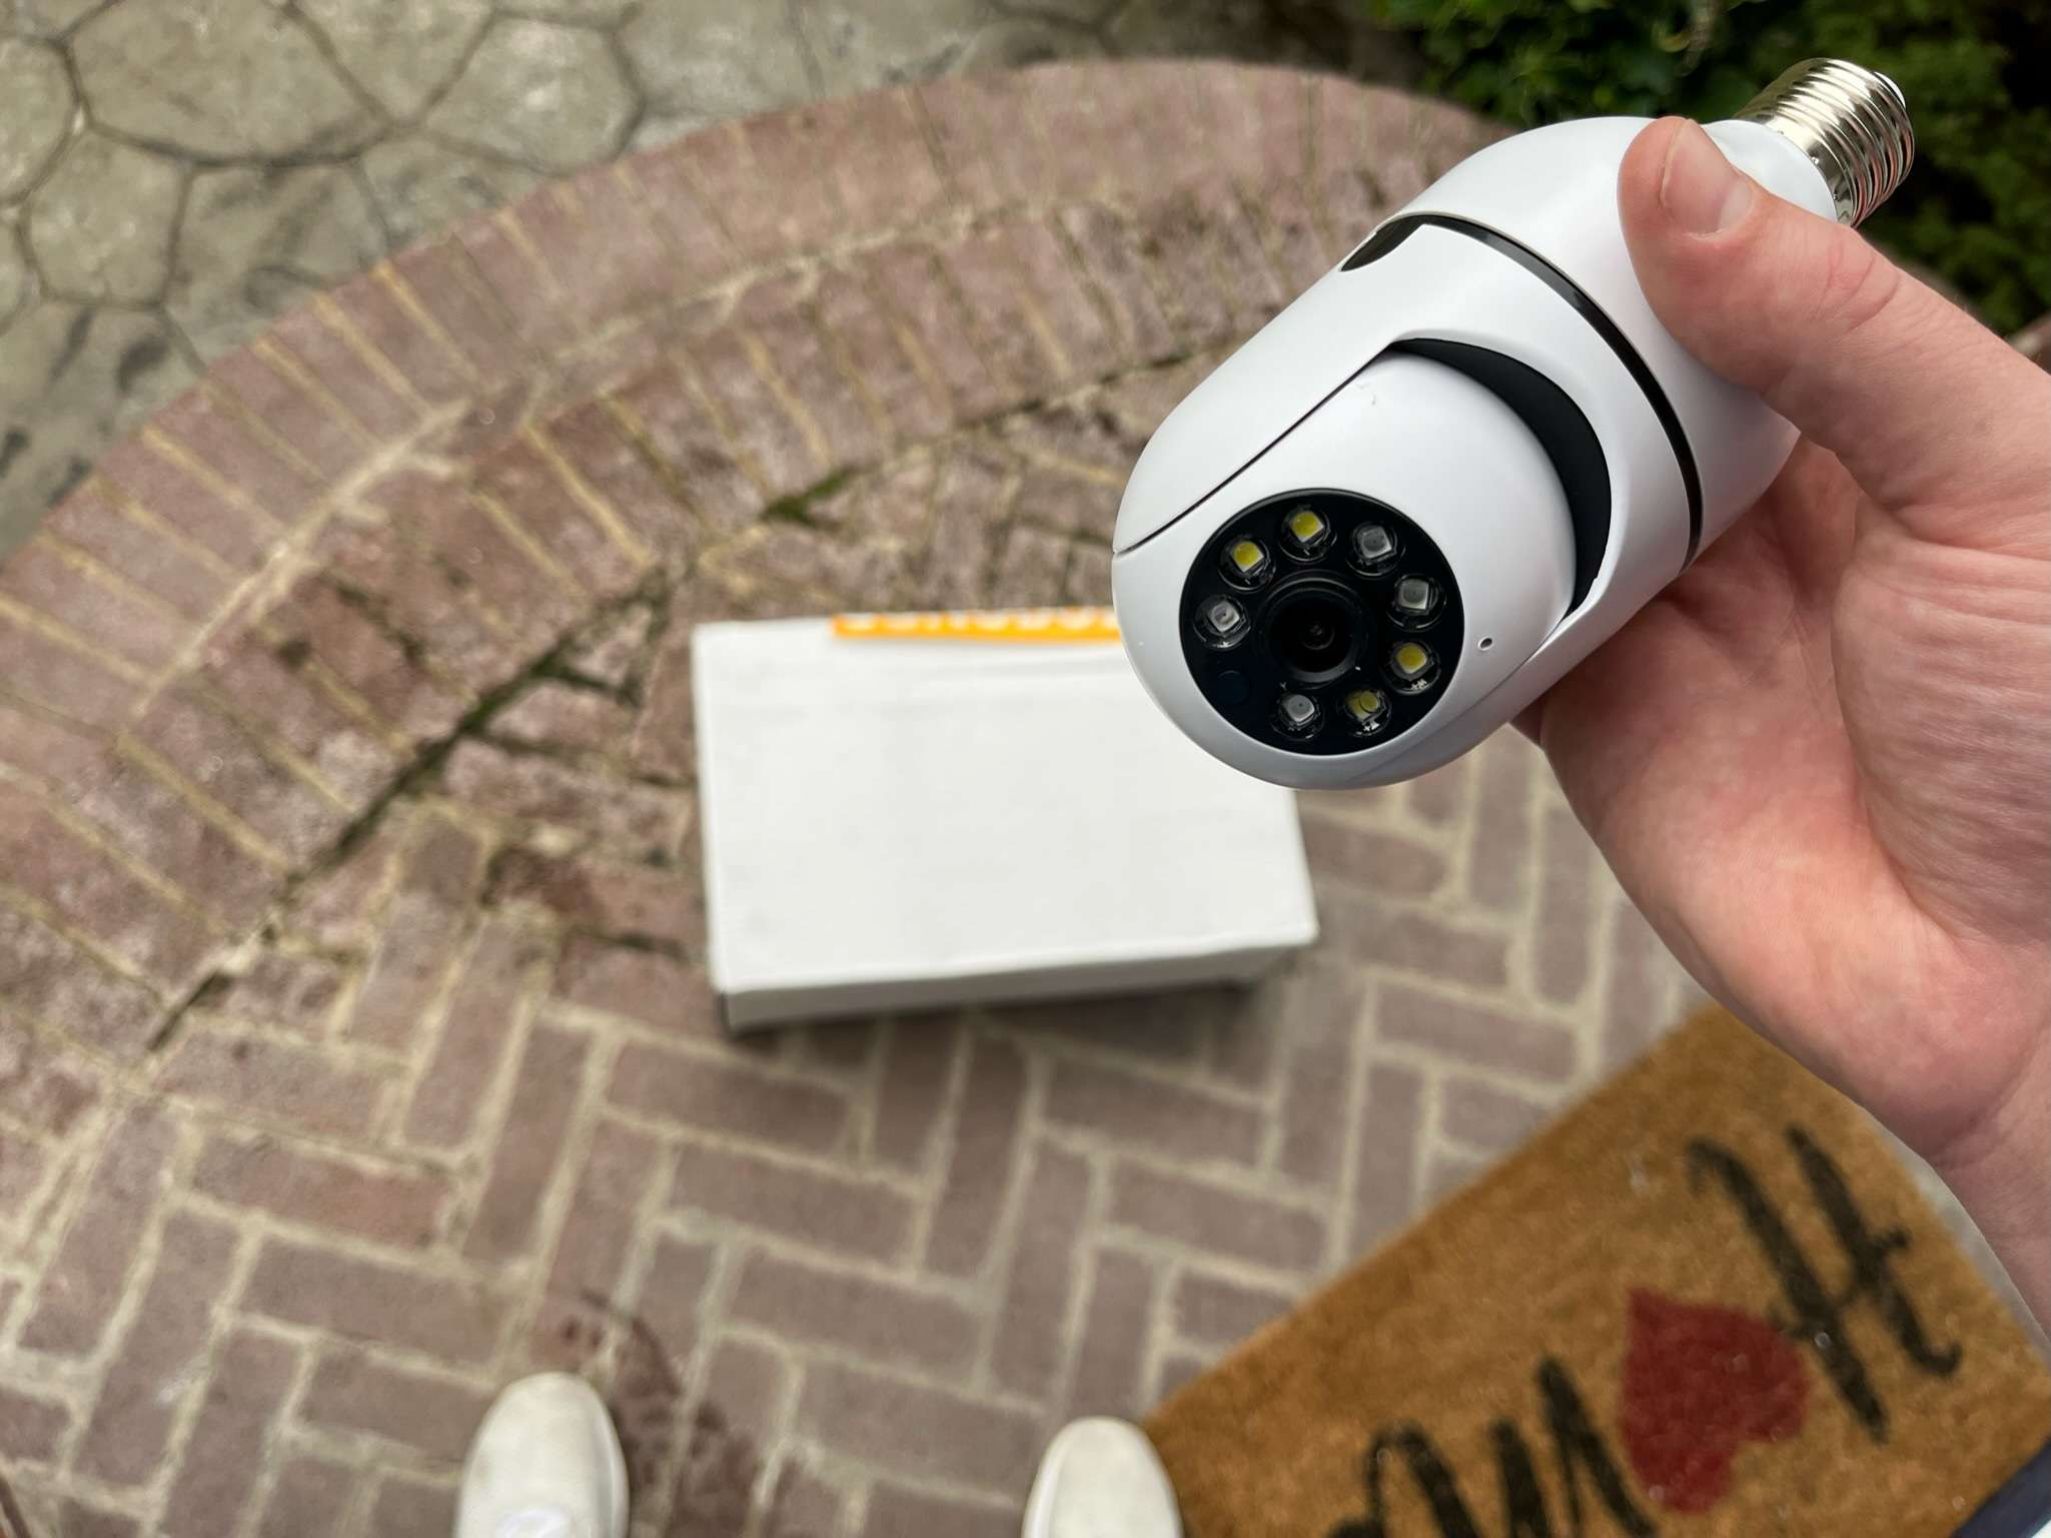 Nomad Security Camera Negative Review